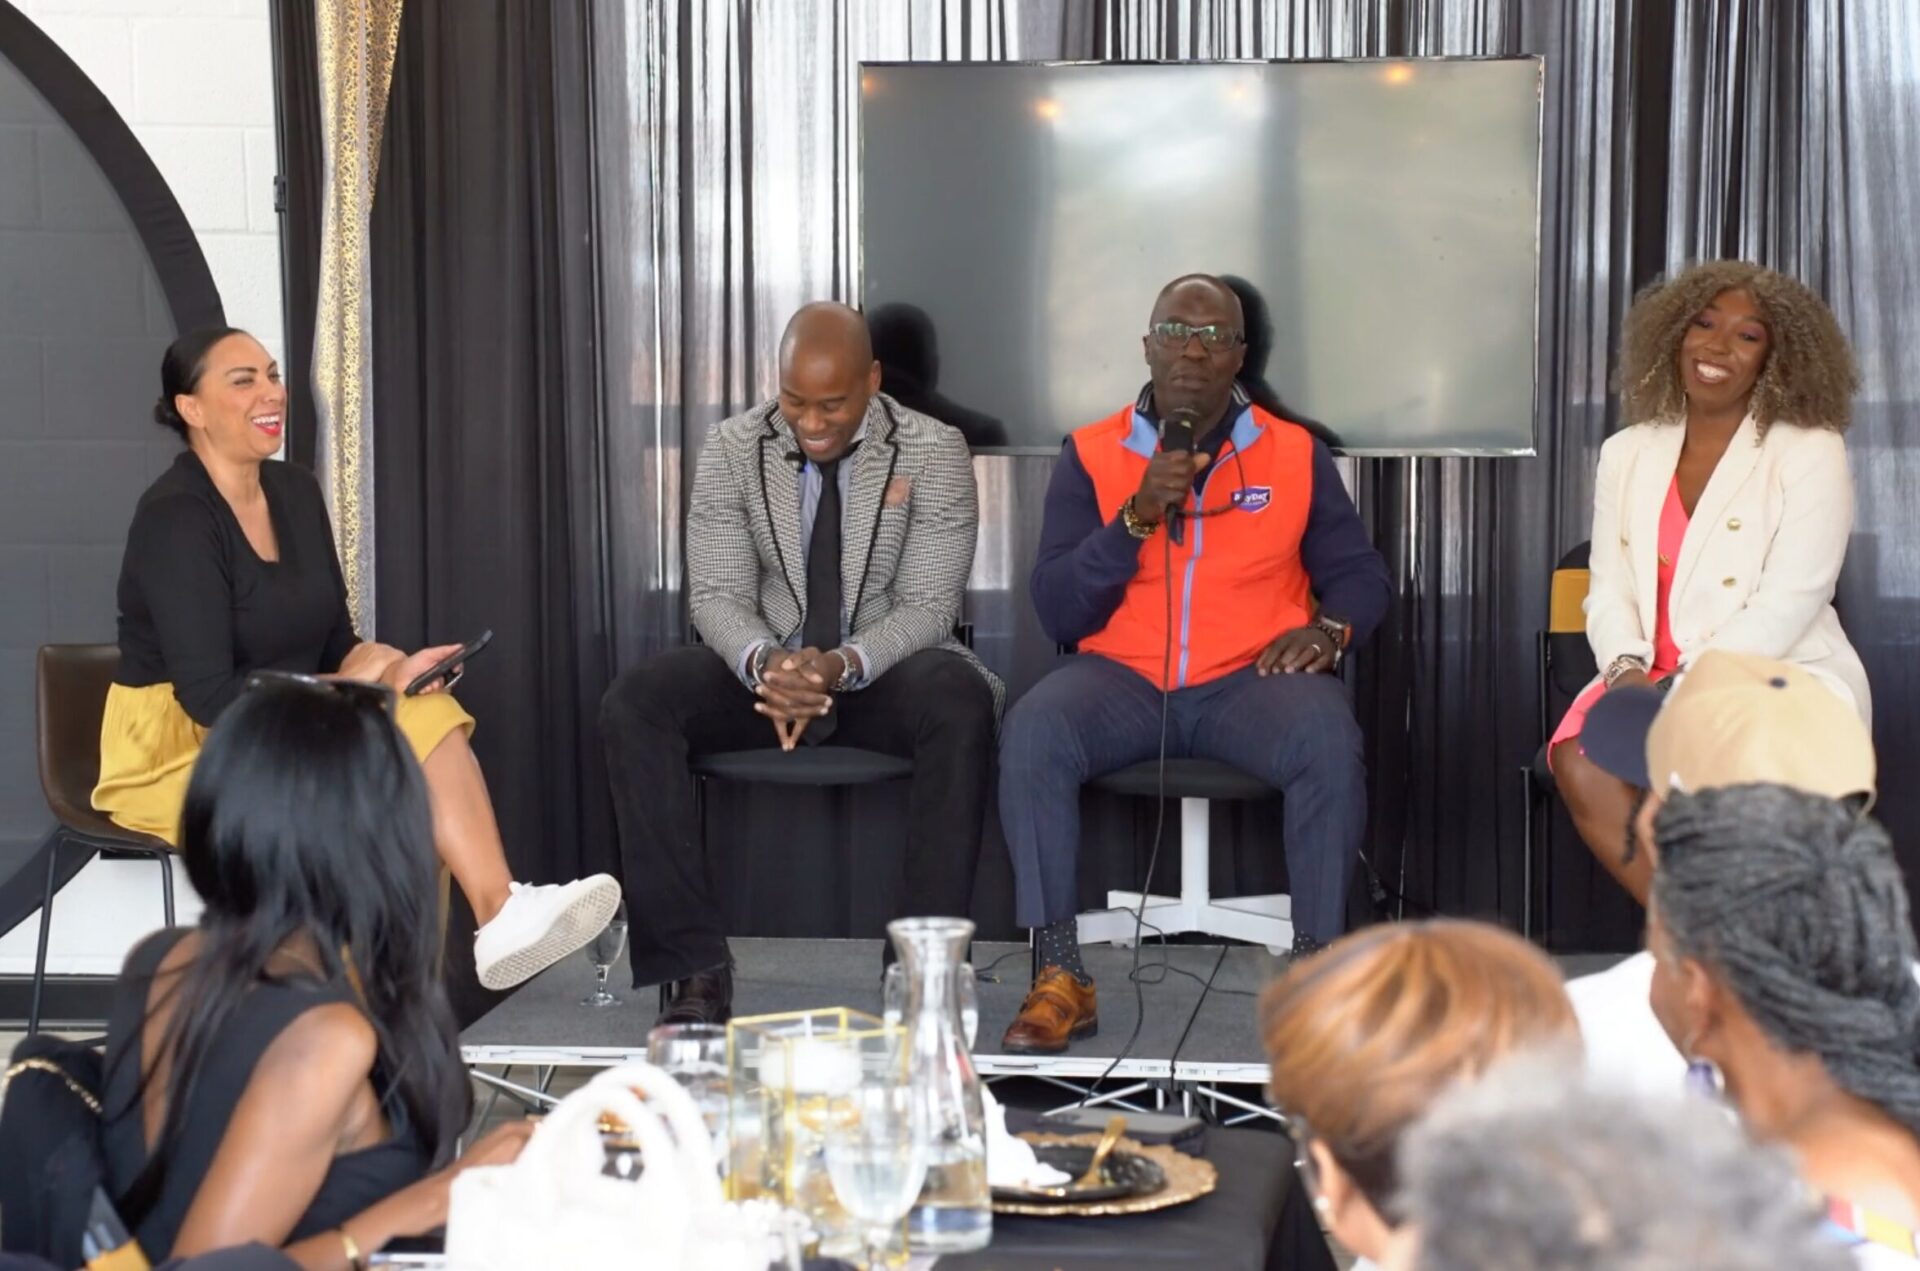 SmallBiz Mid-Day Soiree featured a panel discussion centered on the keys to small business growth success.